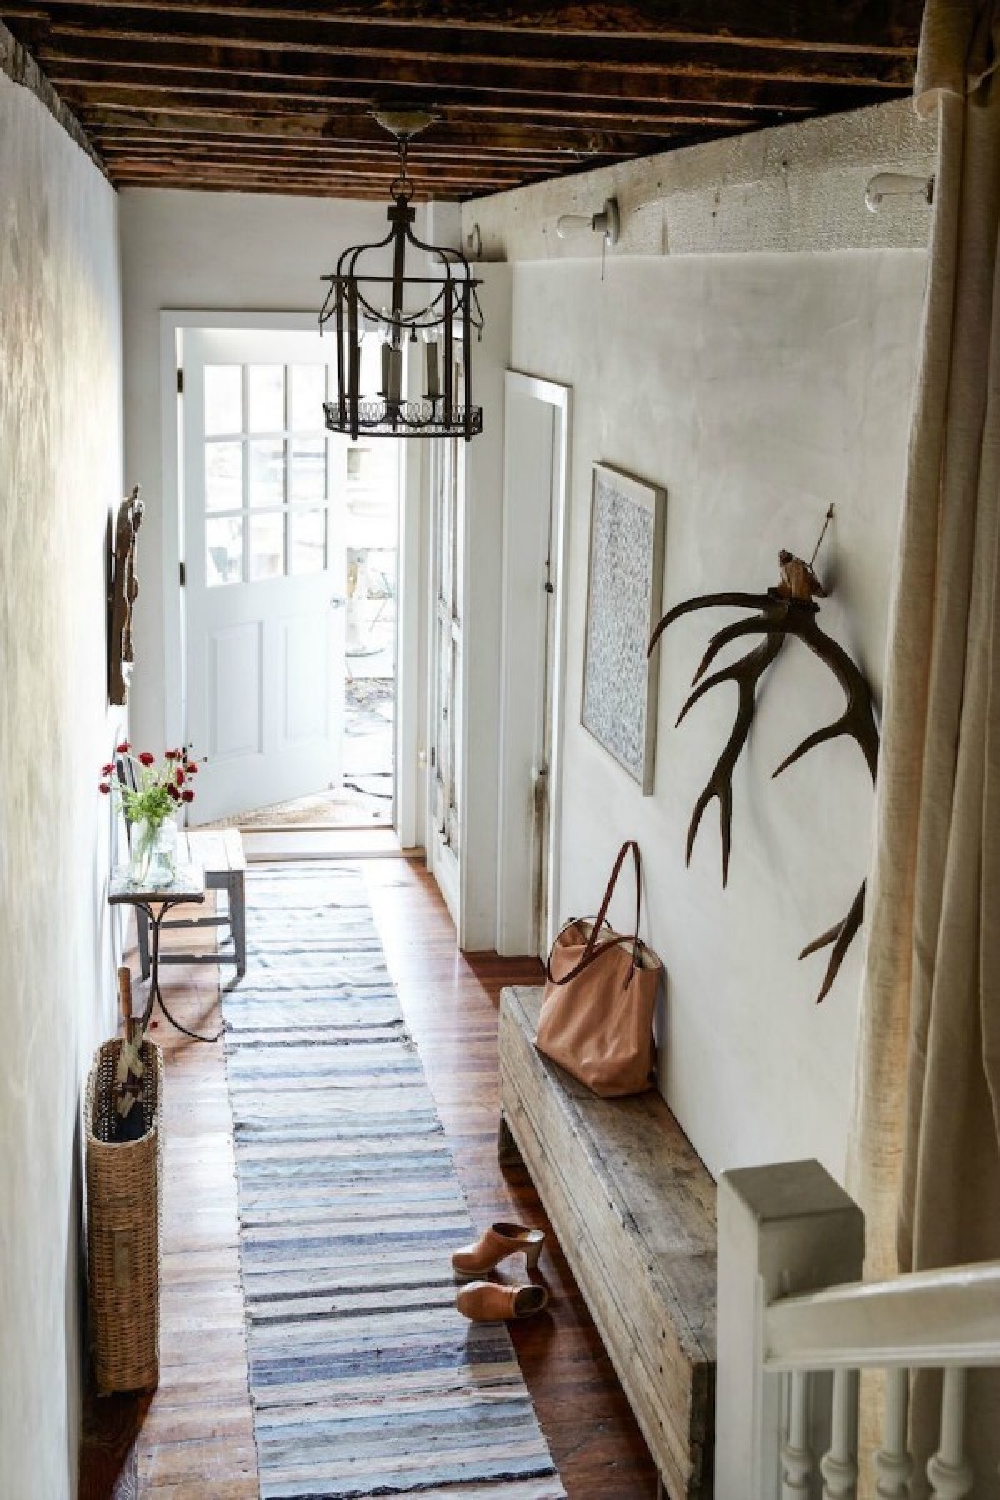 Gorgeous European farmhouse style in a New York apartment entry with rustic finishes and antiques by Jocelyn Sinnauer.